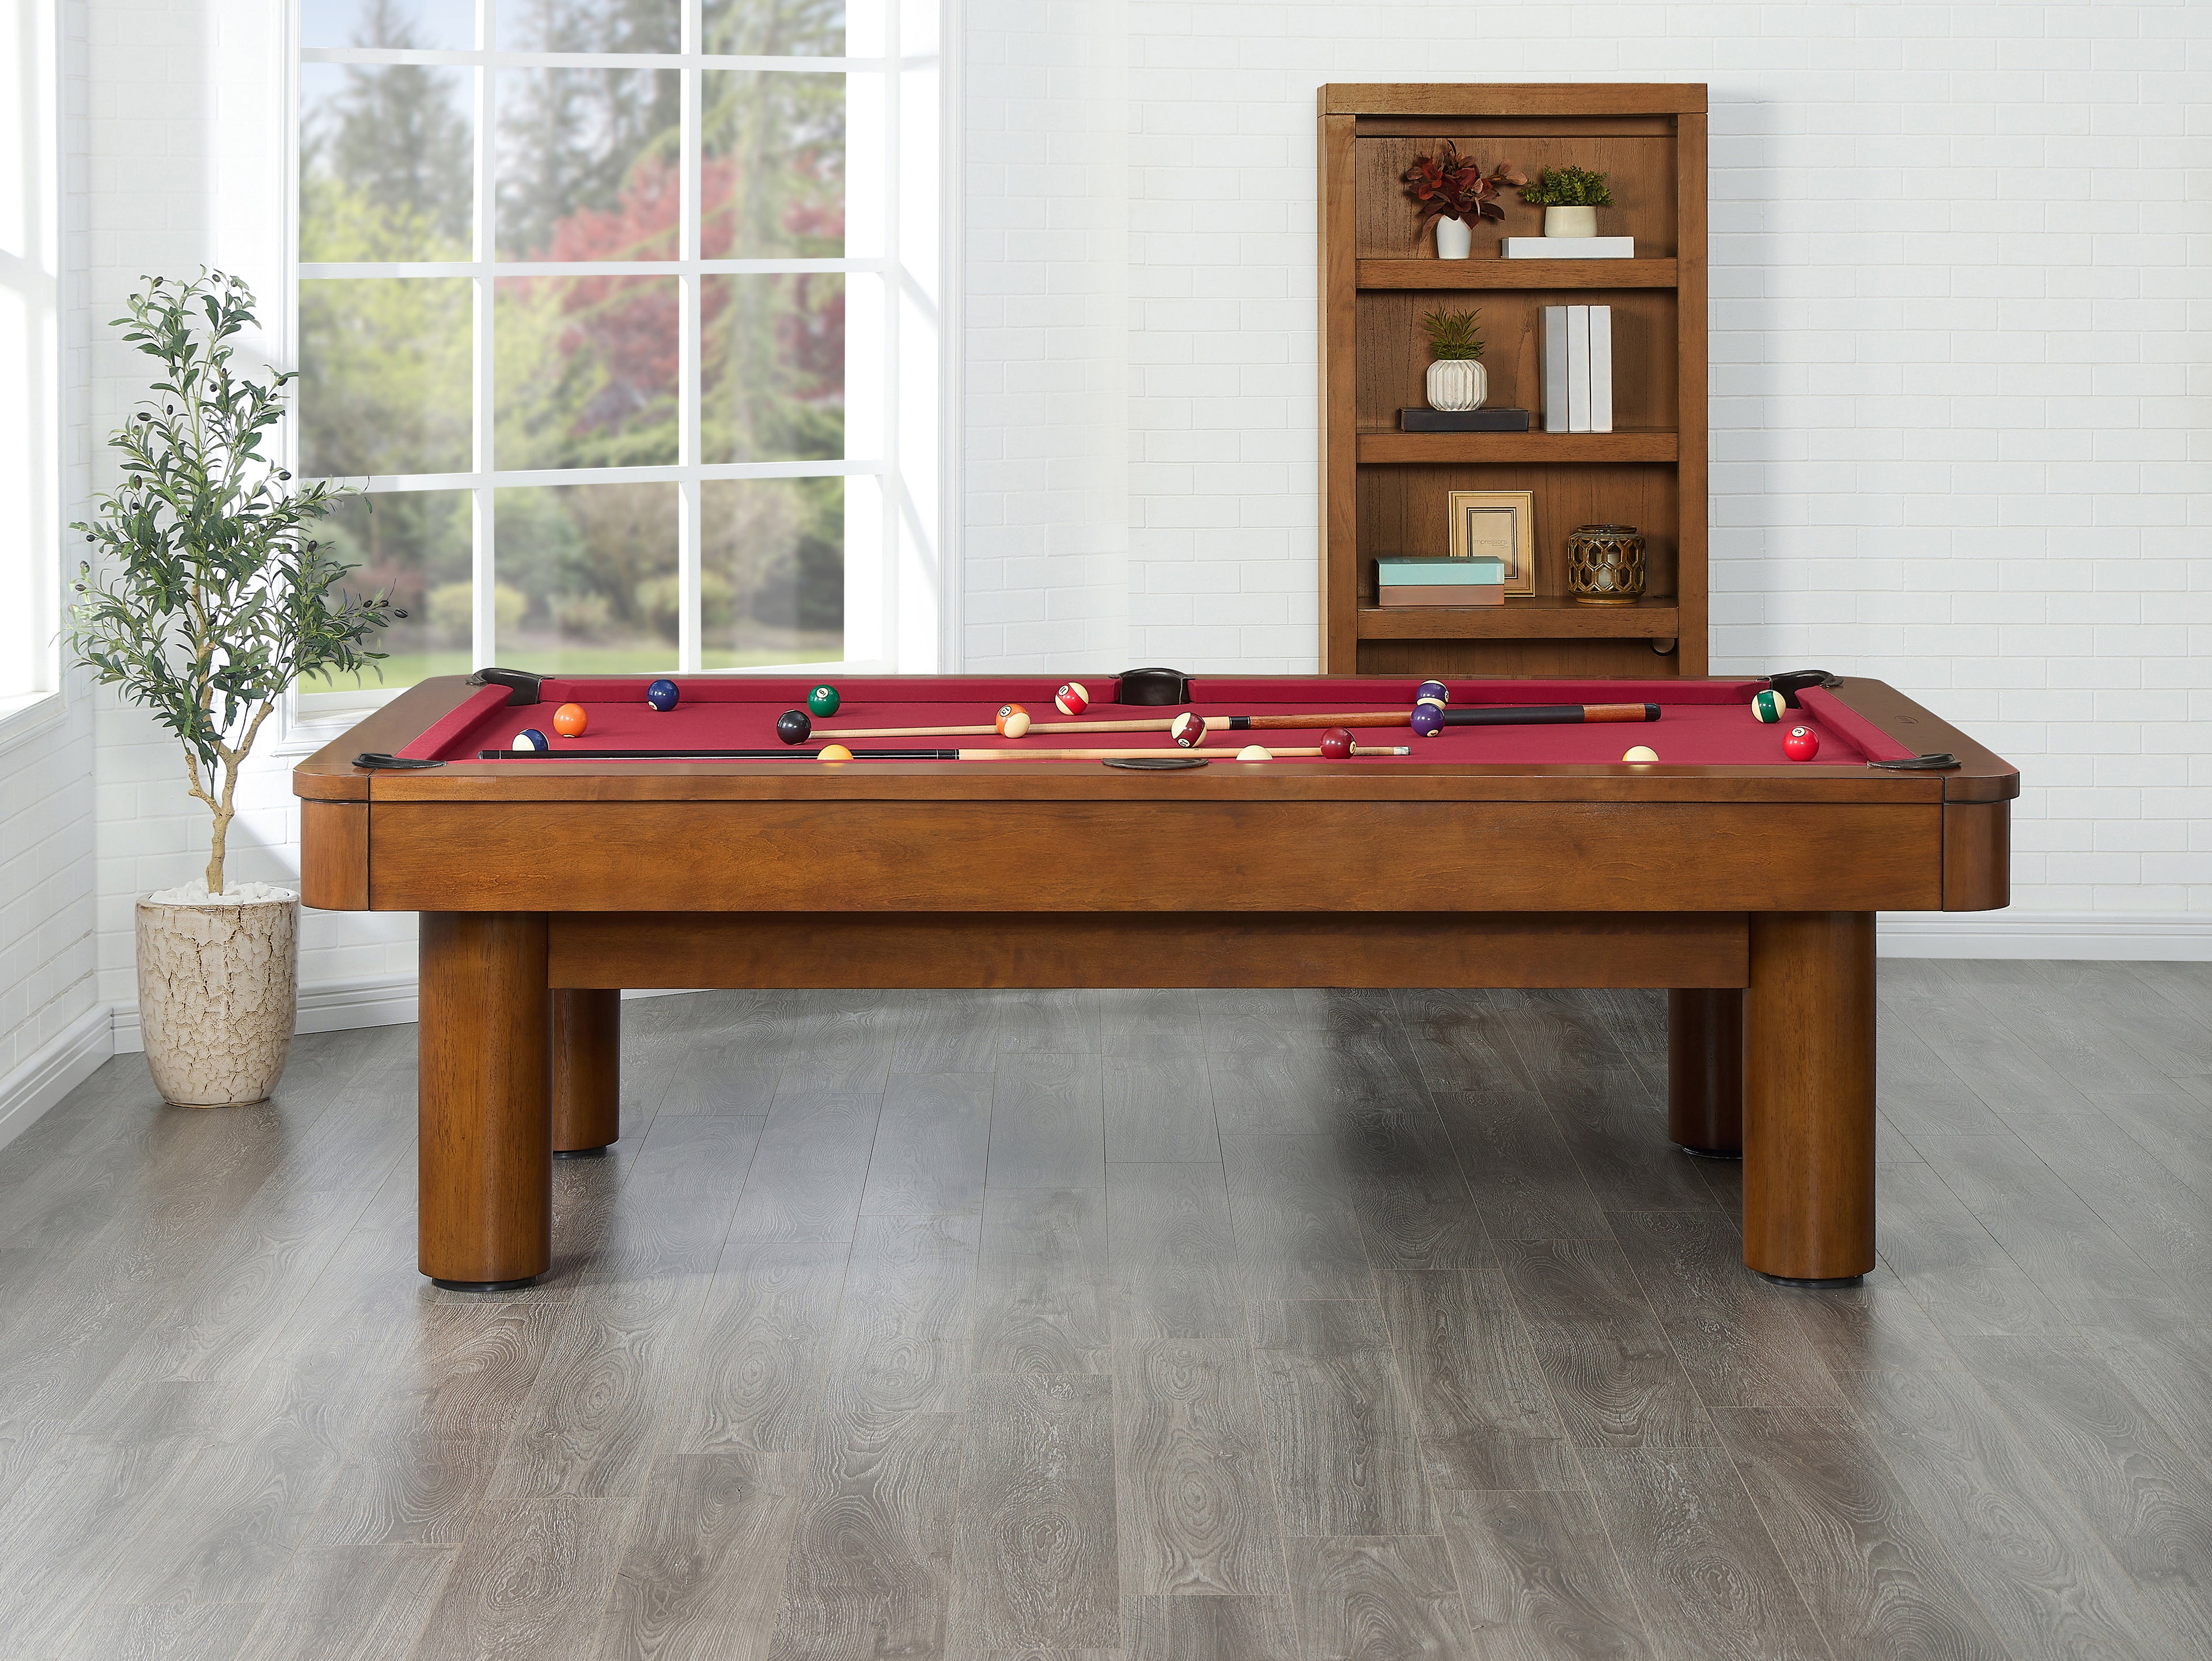 Legacy Billiards Dillard 7 Ft Pool Table in Walnut Finish with Red Cloth - Room Scene - Side View